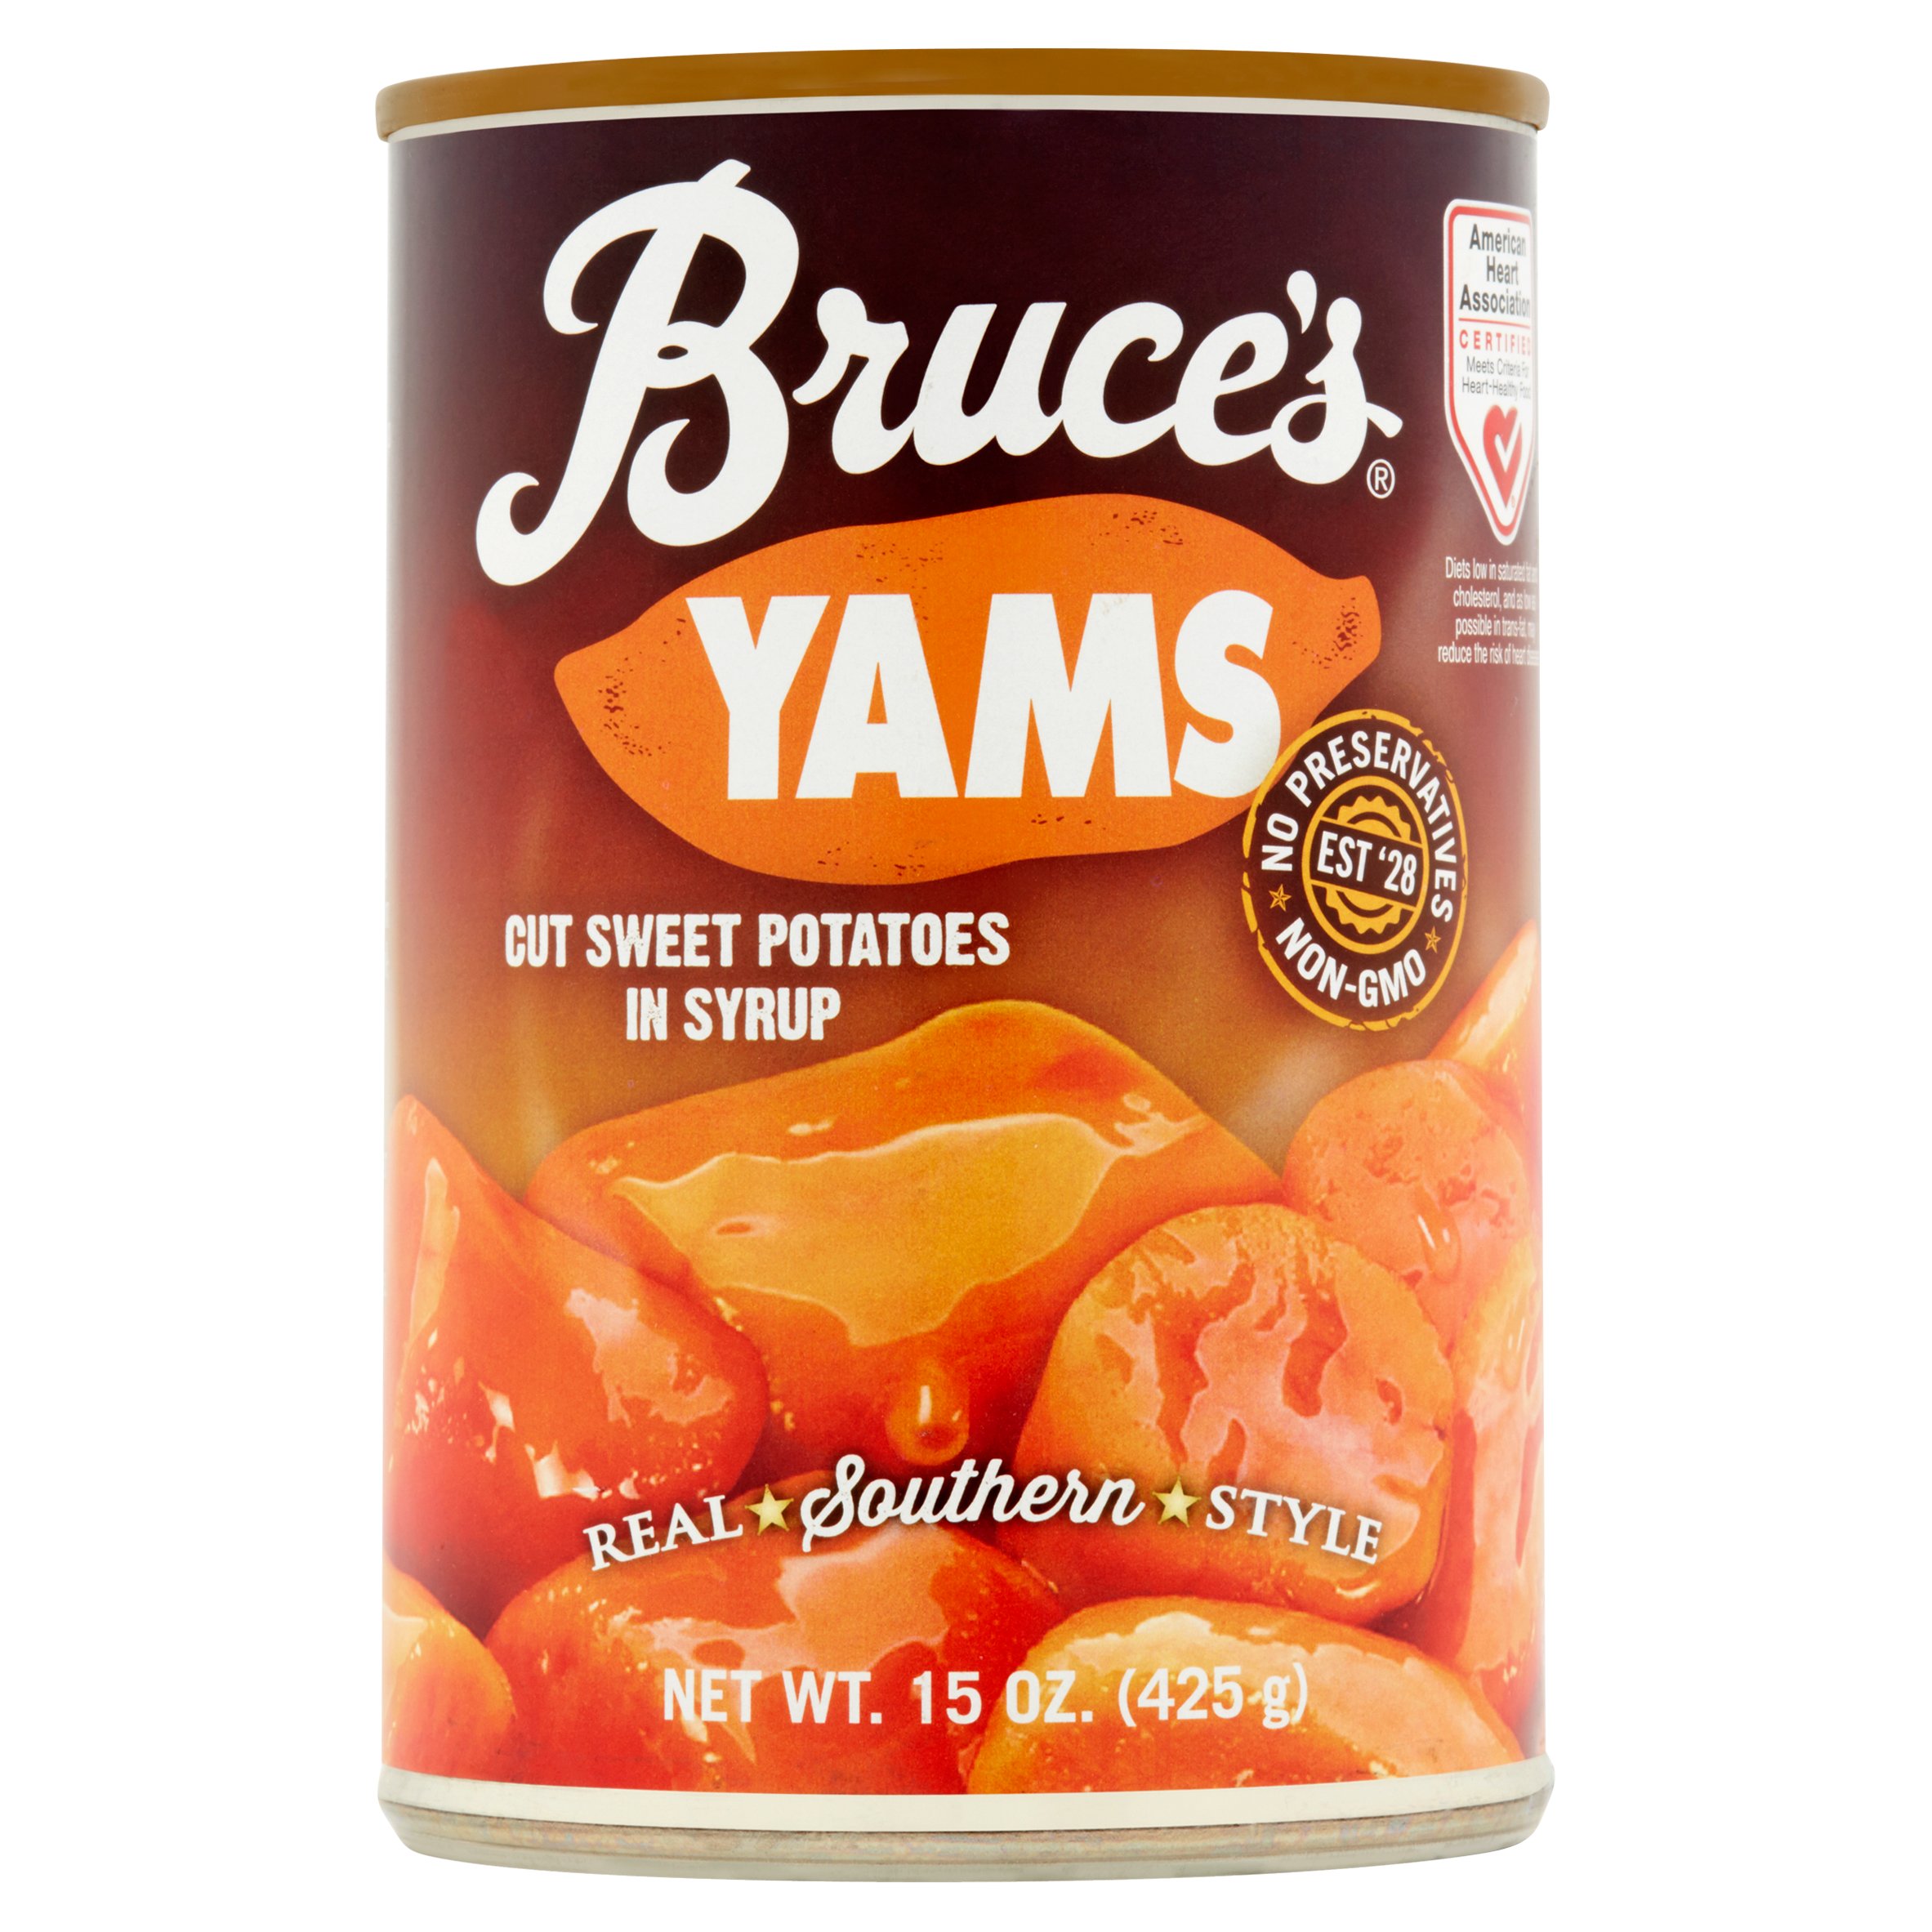 Bruce's Yams Cut Sweet Potatoes in Syrup 15 oz